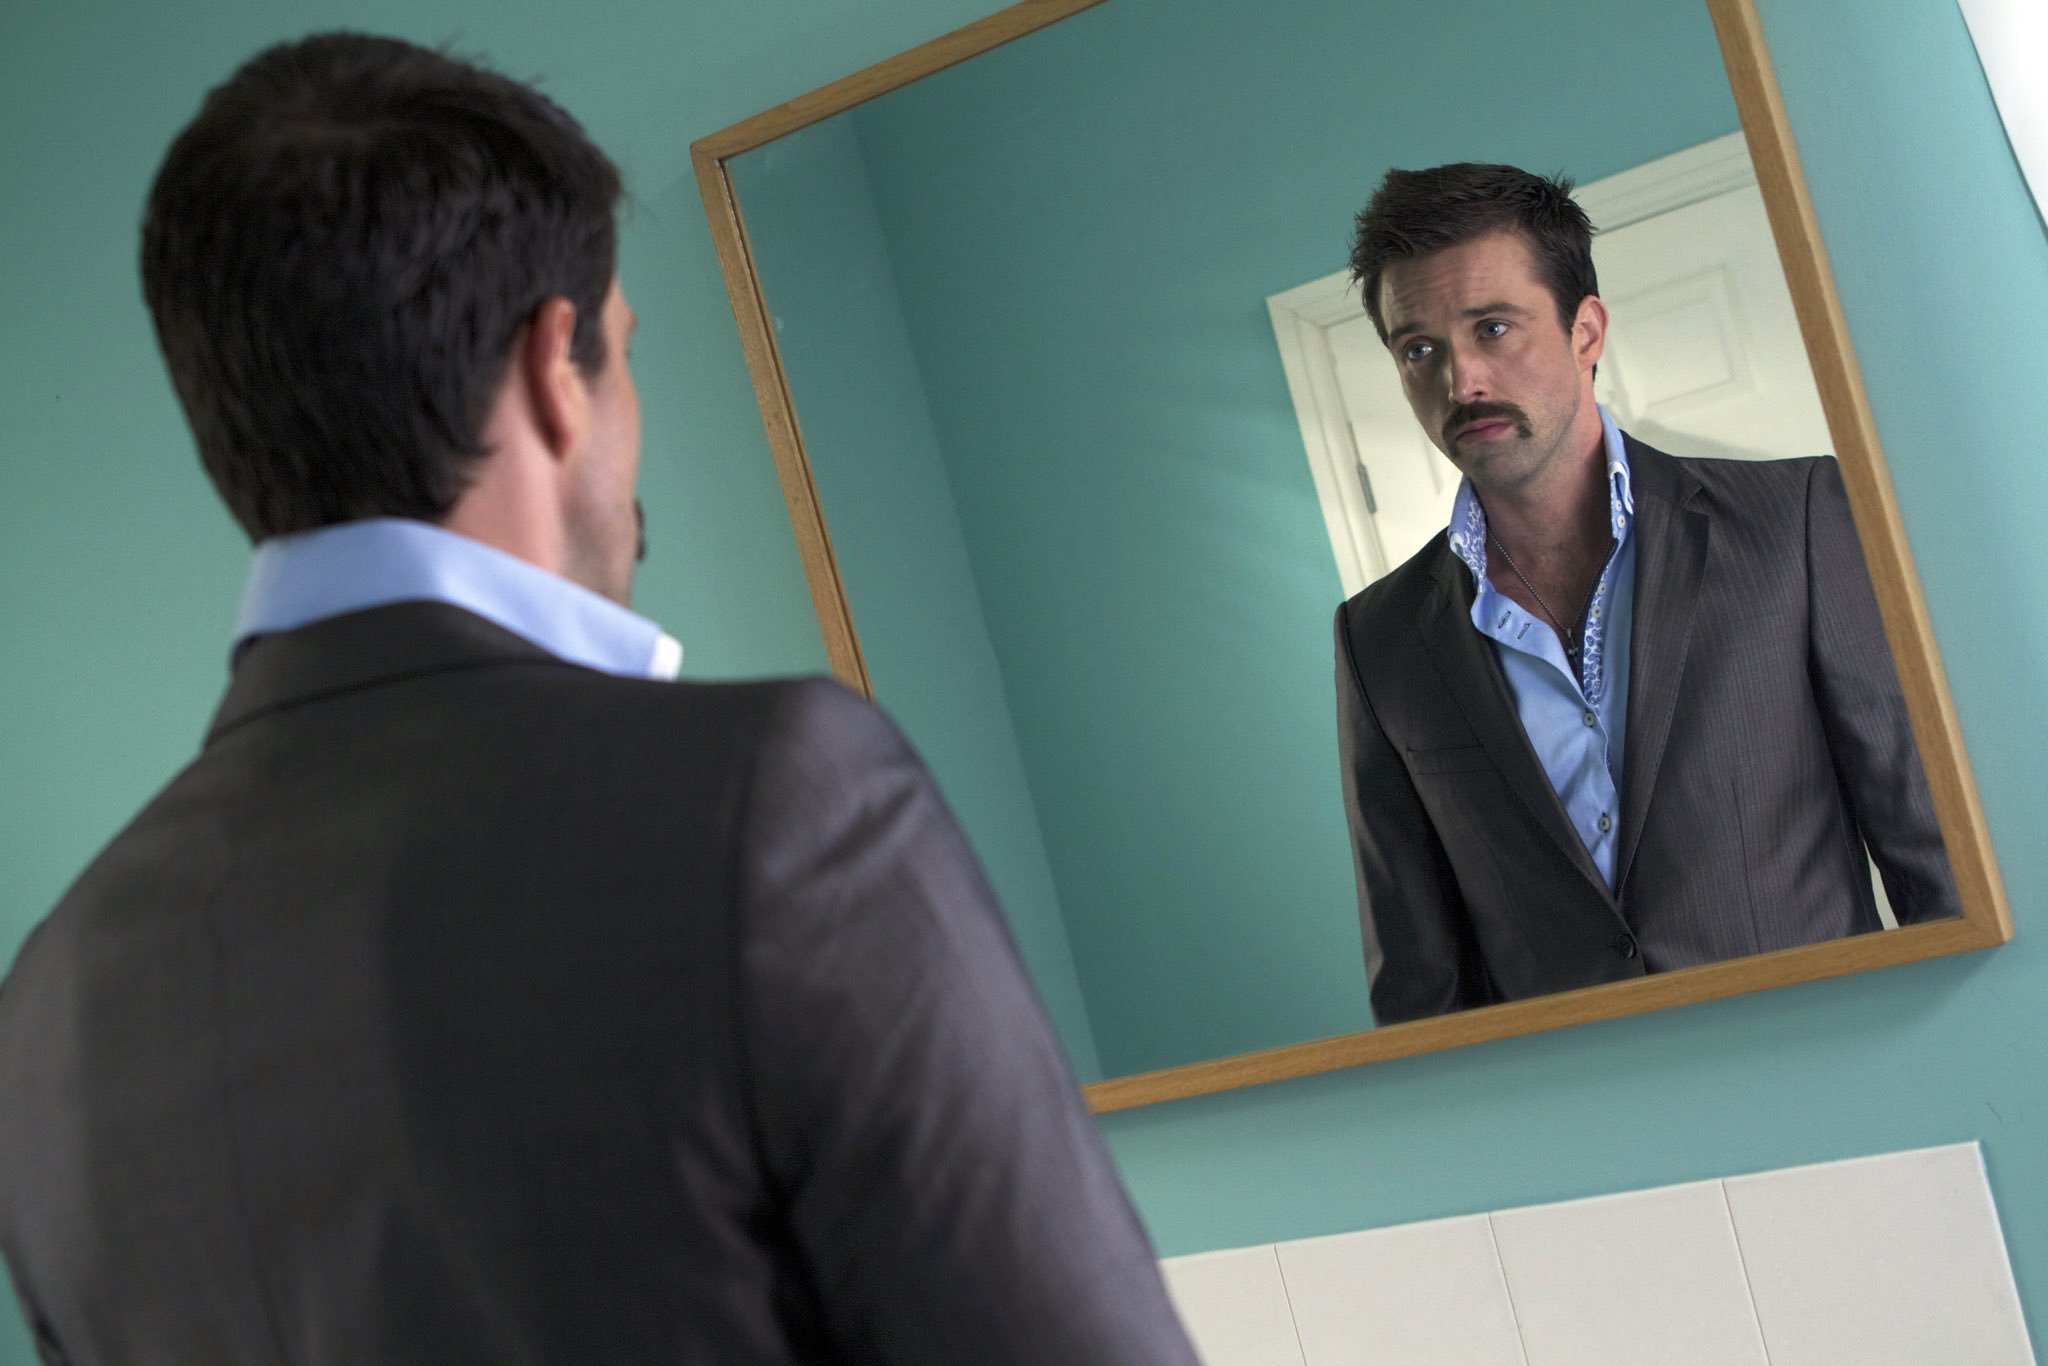 Brendan looks at his reflection in a mirror. He is wearing a smart suit and is well-groomed.